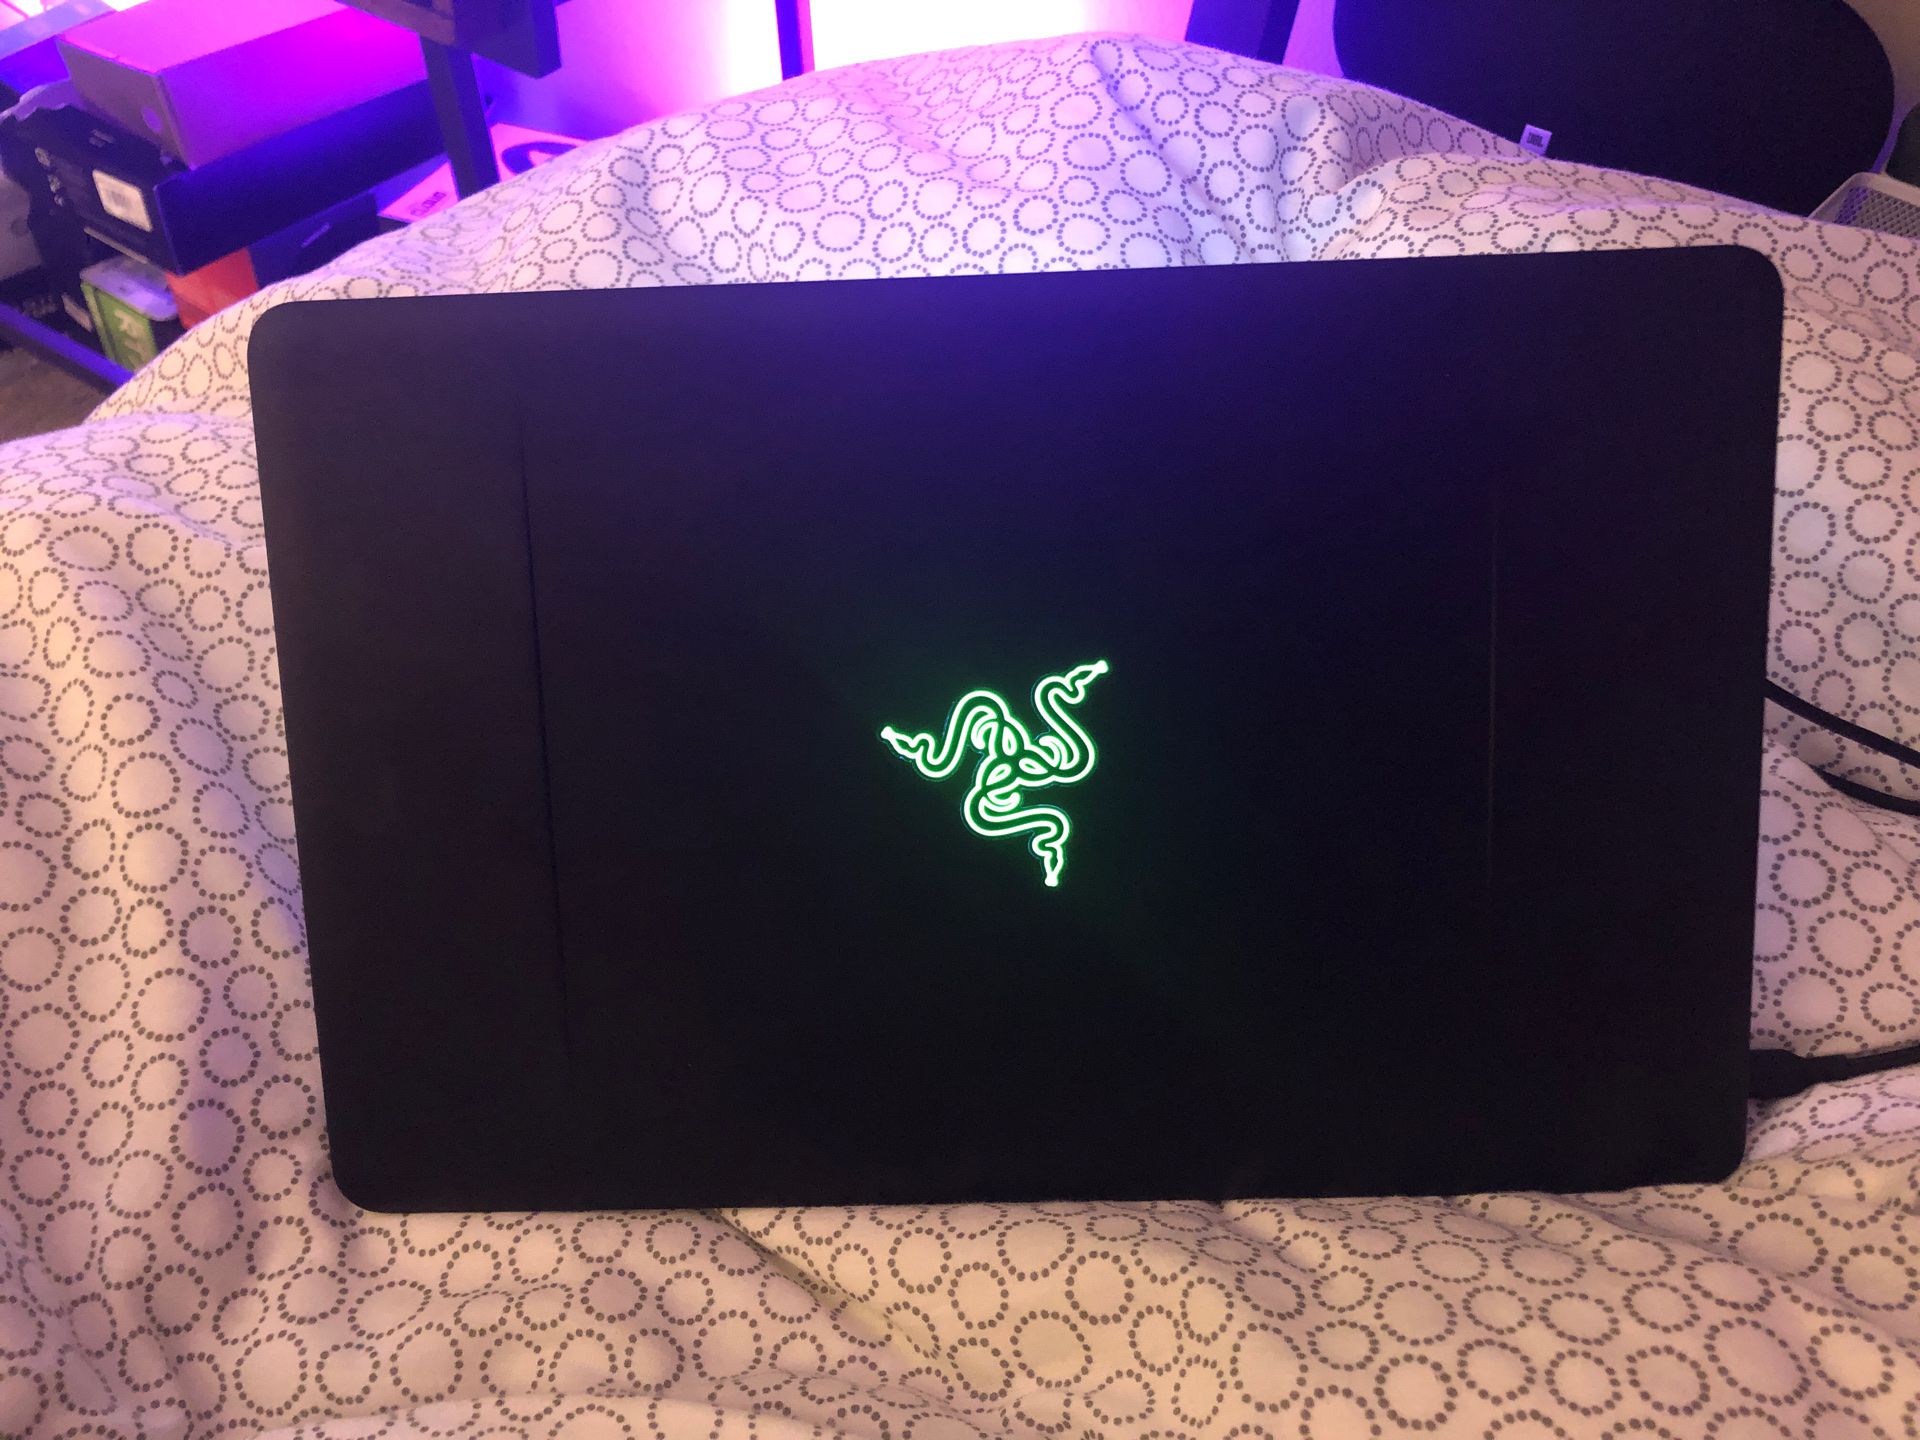 ON HOLD Razer Blade Stealth late 2016/early 2017 READ DESCRIPTION